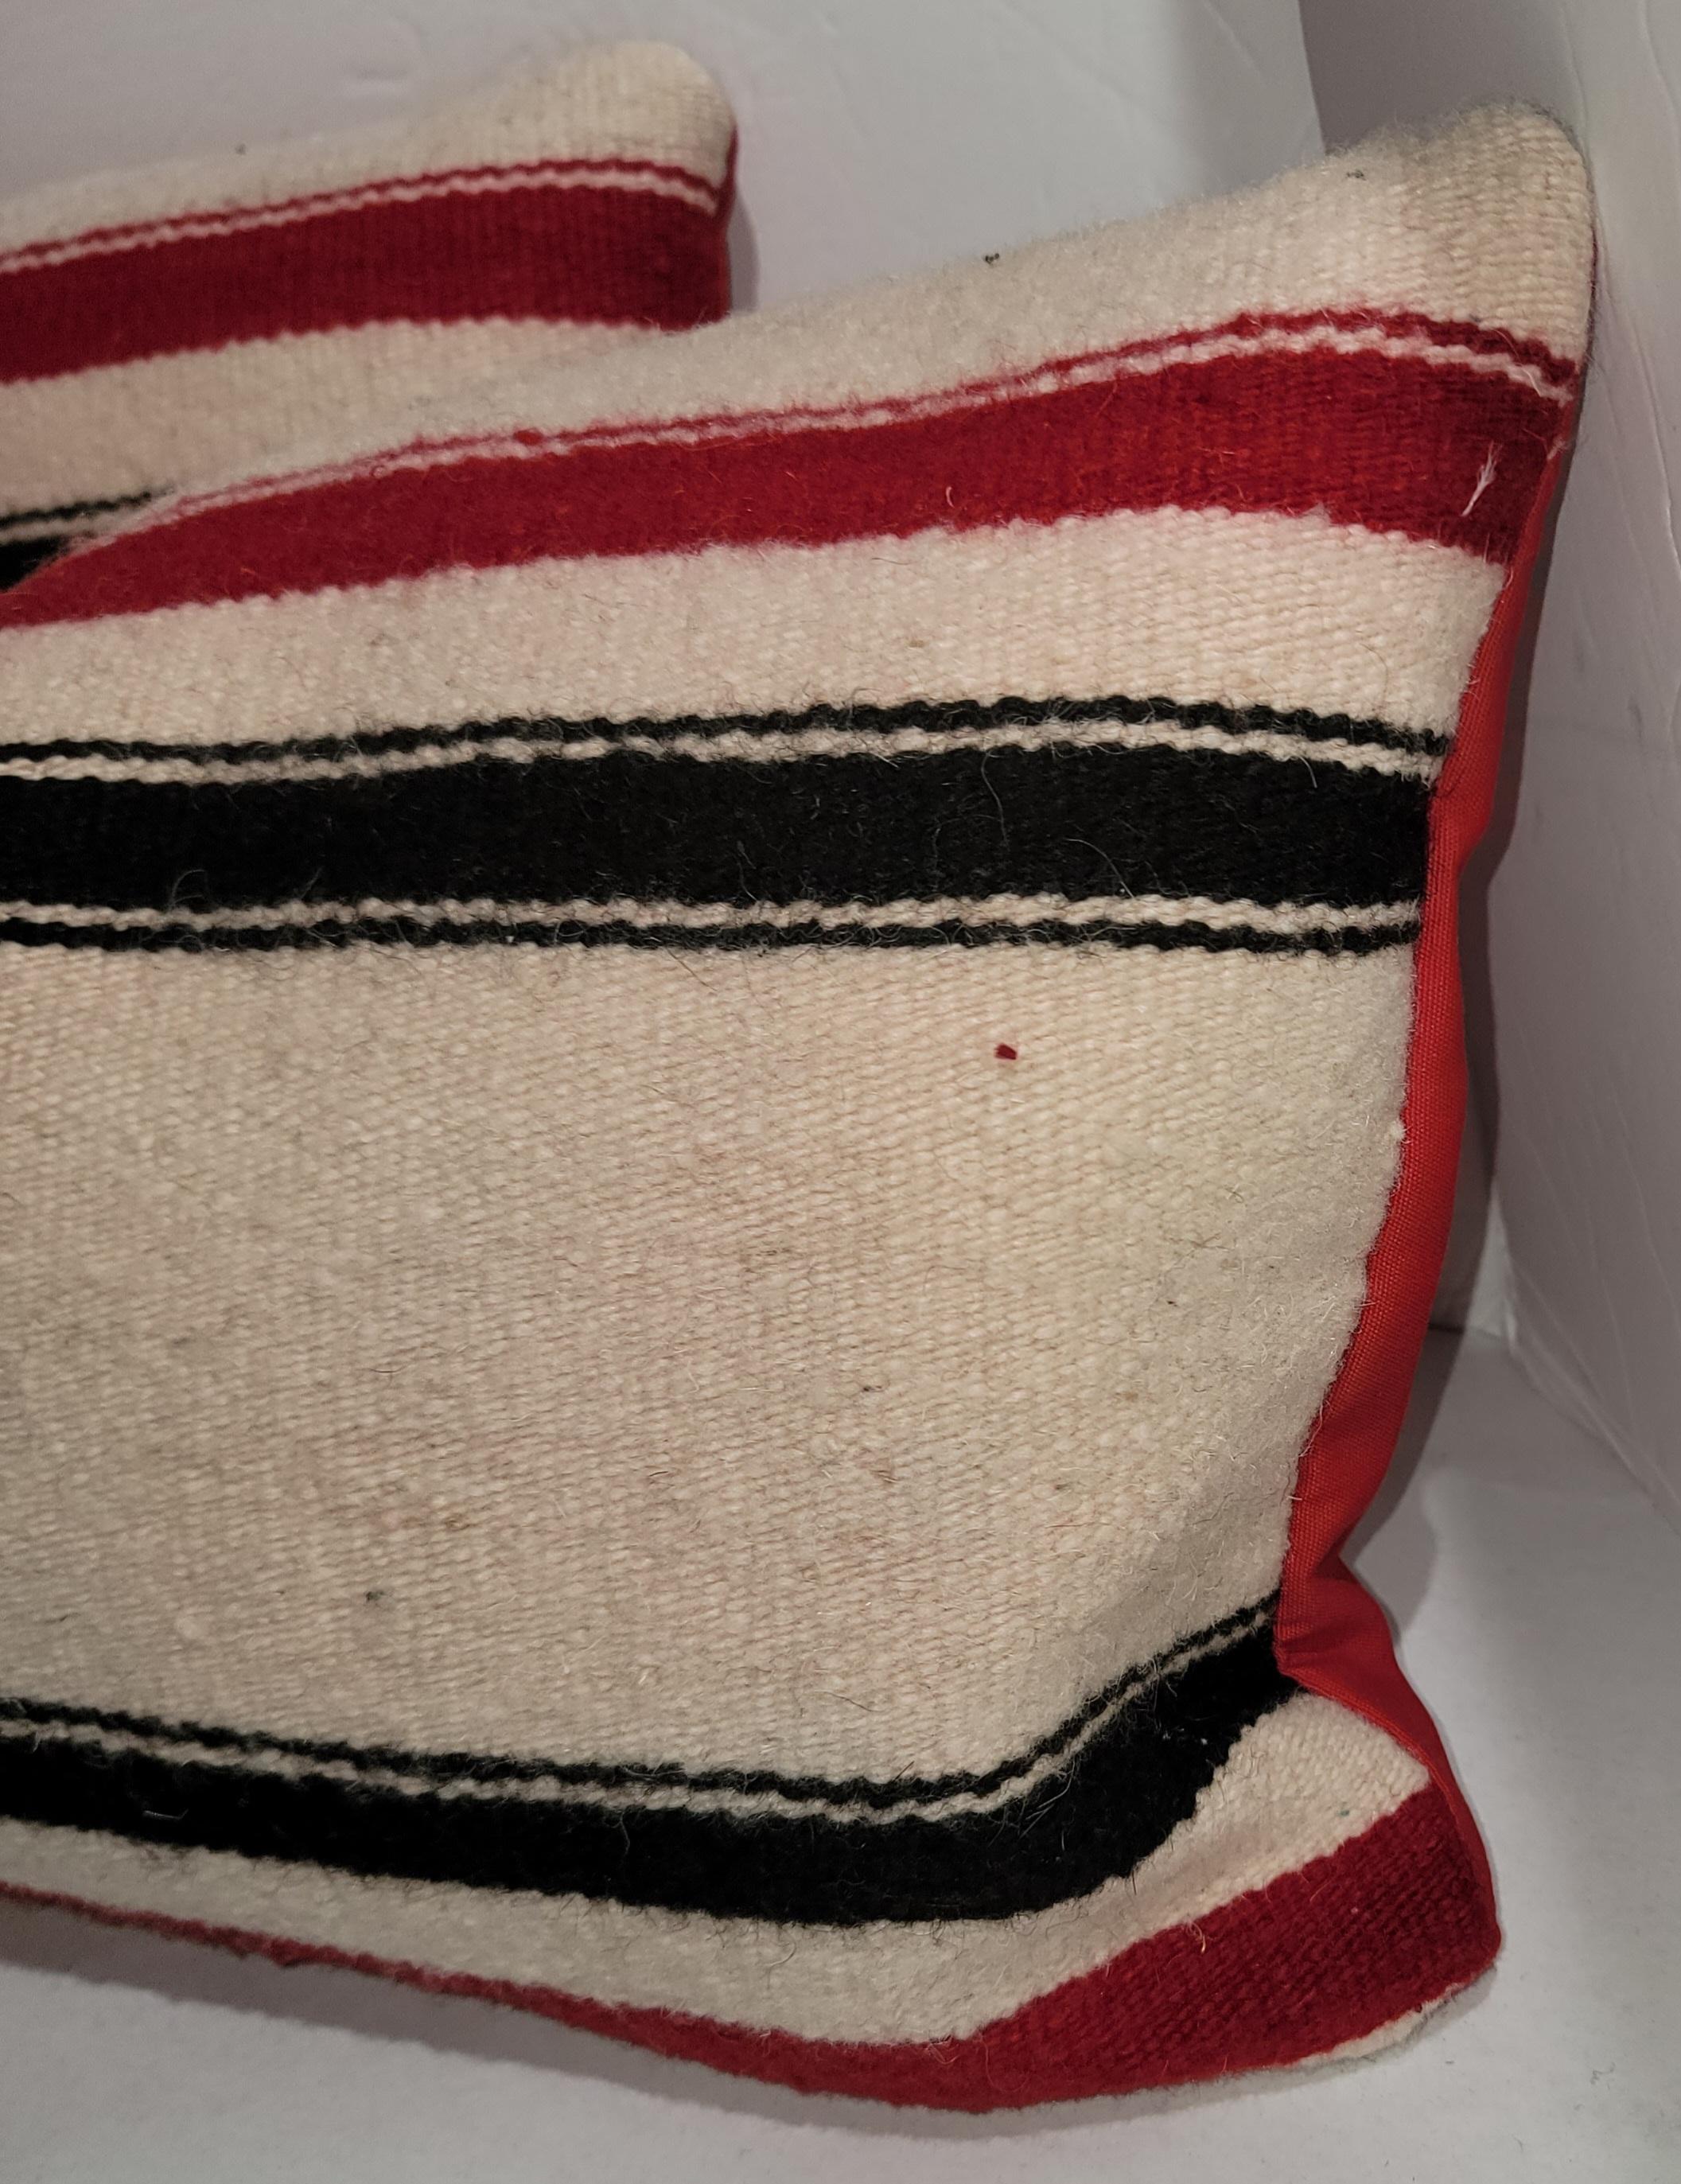 Clean wool red and black striped saddle blanket pillows with a clean white wool background. There is a bright red linen backing used for this pair of pillows.  Down and feather inserts for each.